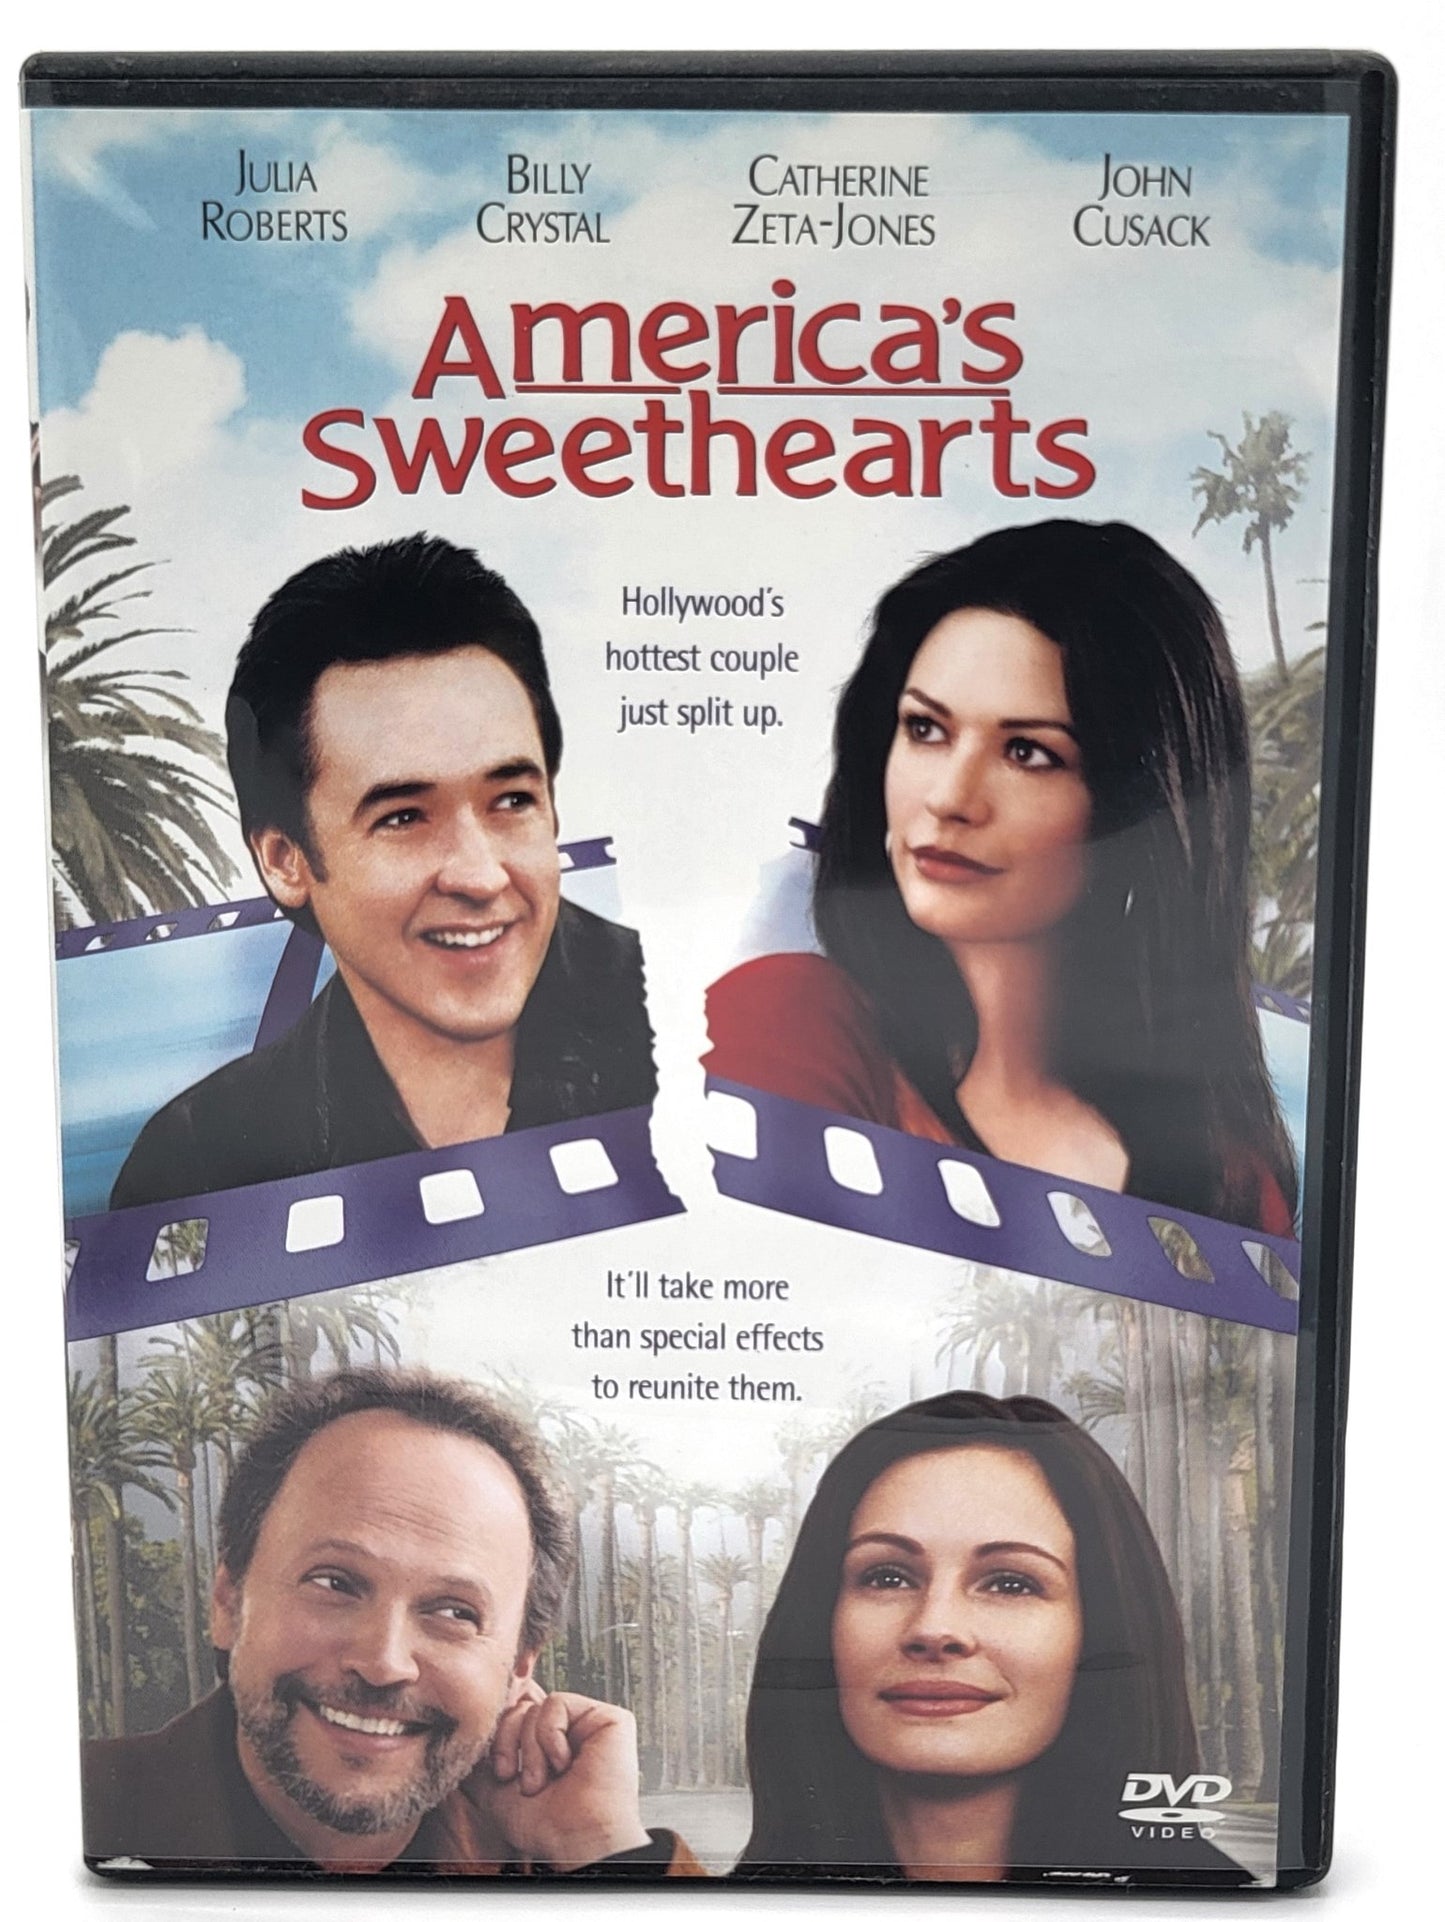 Columbia Pictures - America's Sweethearts | DVD | Widescreen & Fullscreen - DVD - Steady Bunny Shop